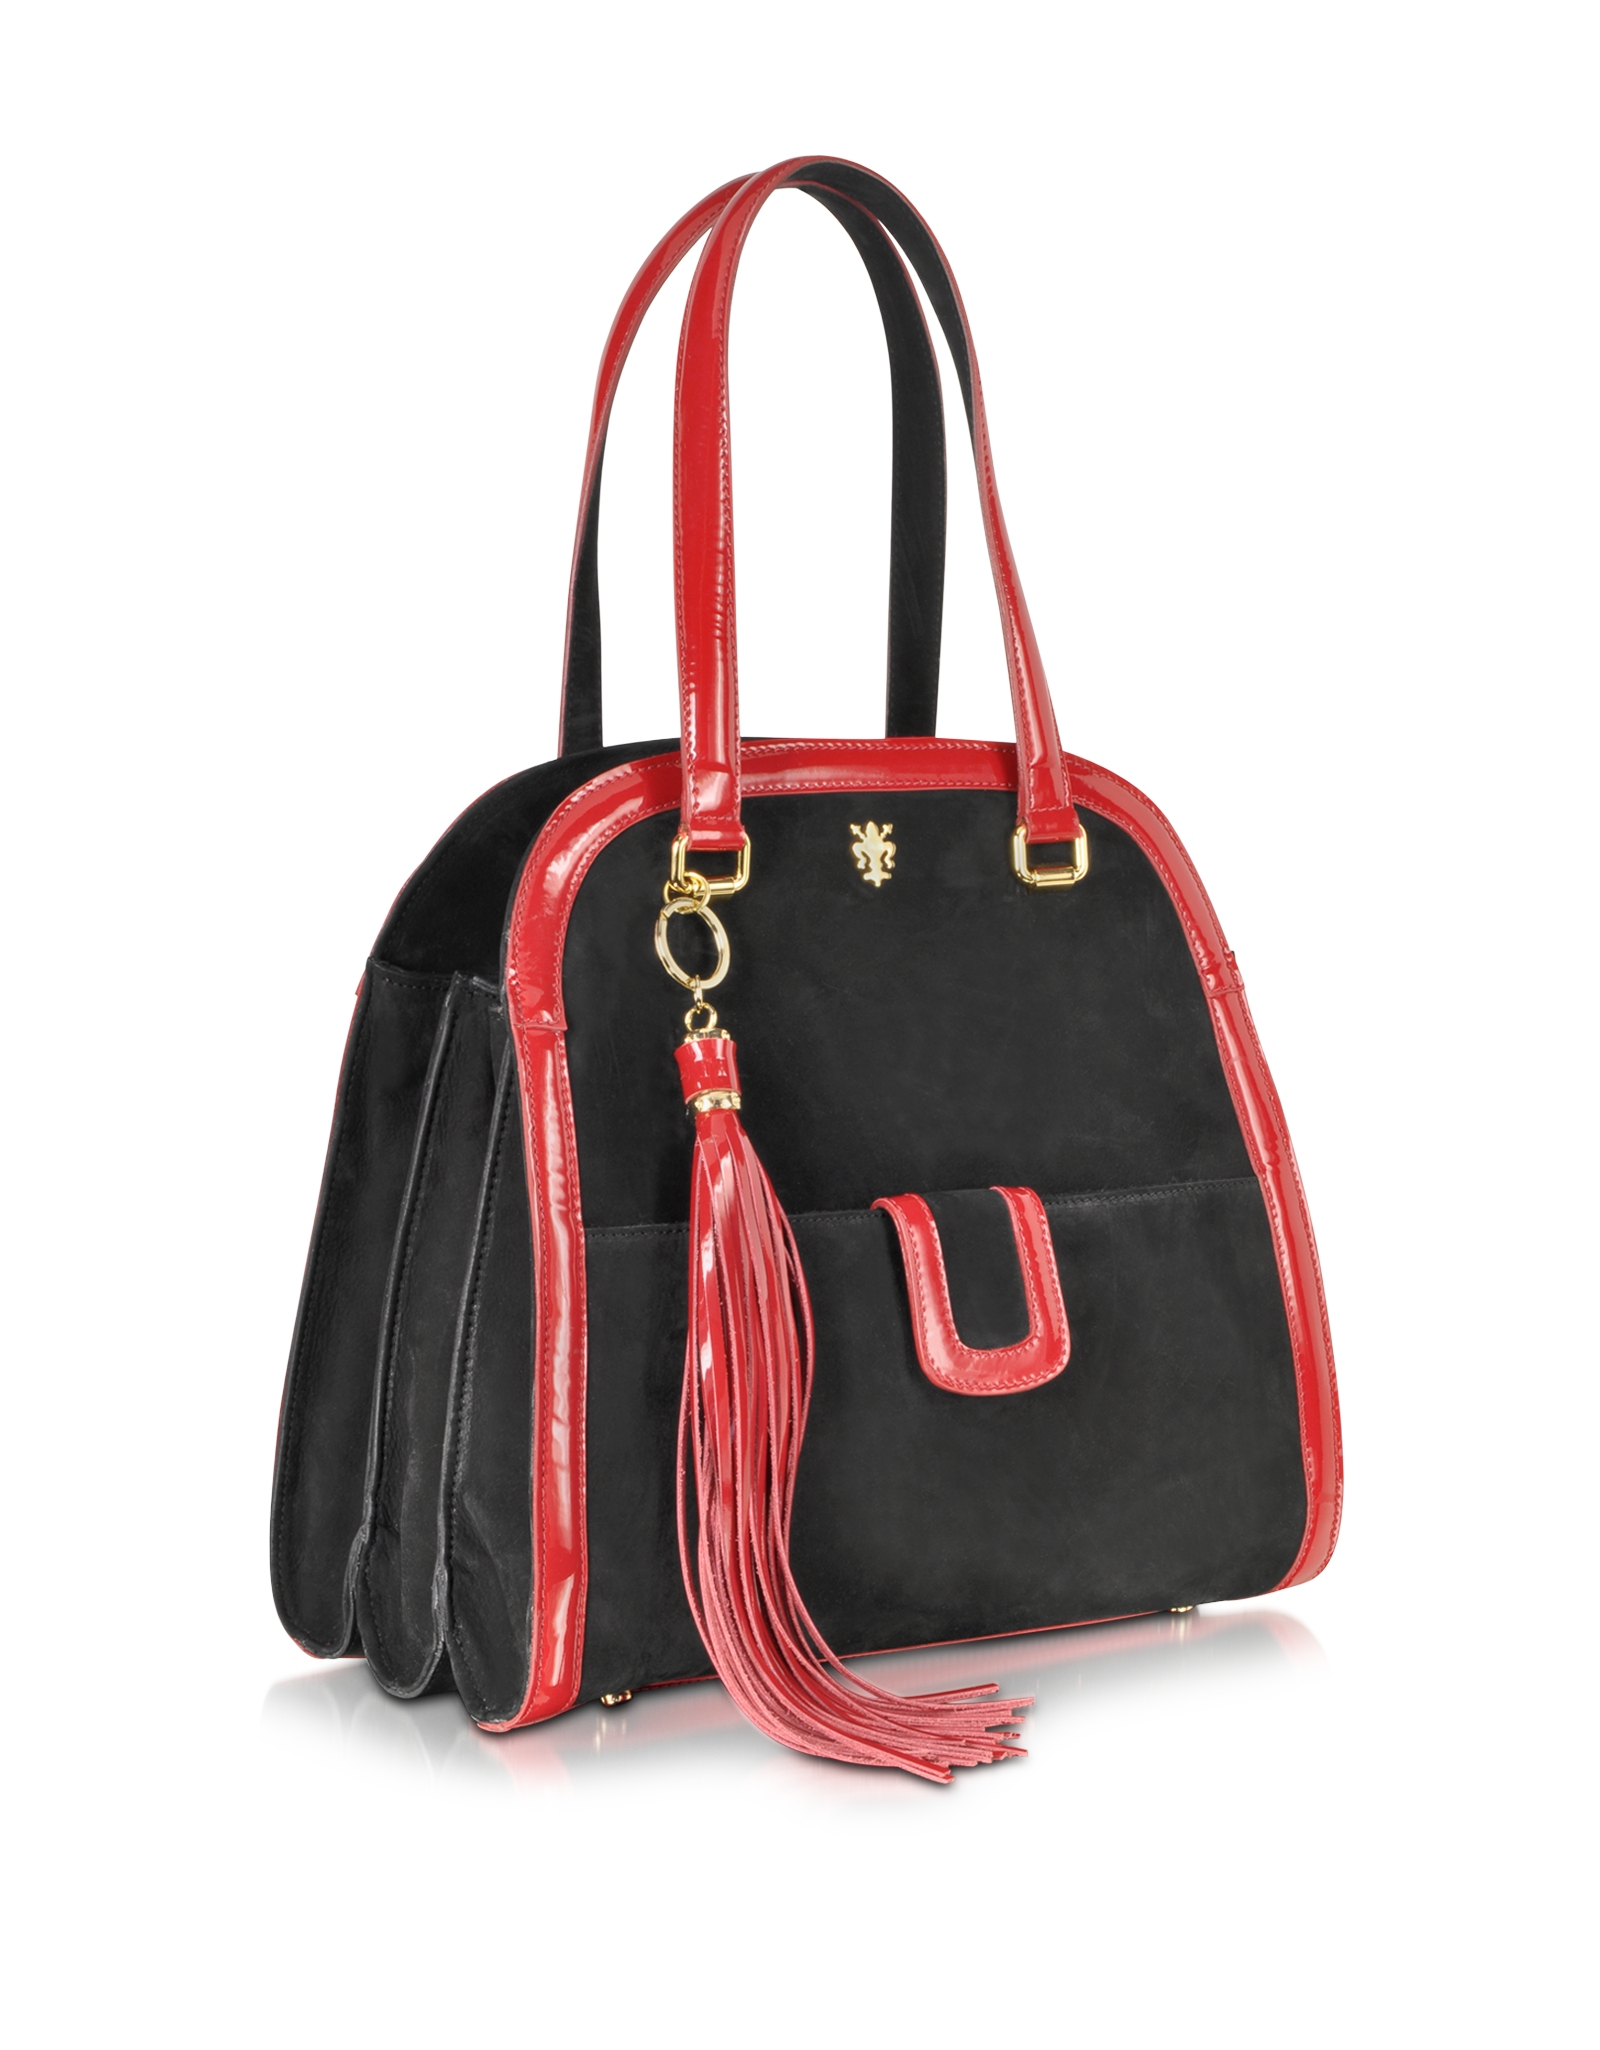 Lyst - Buti Black Suede And Red Patent Leather Shoulder Bag in Black